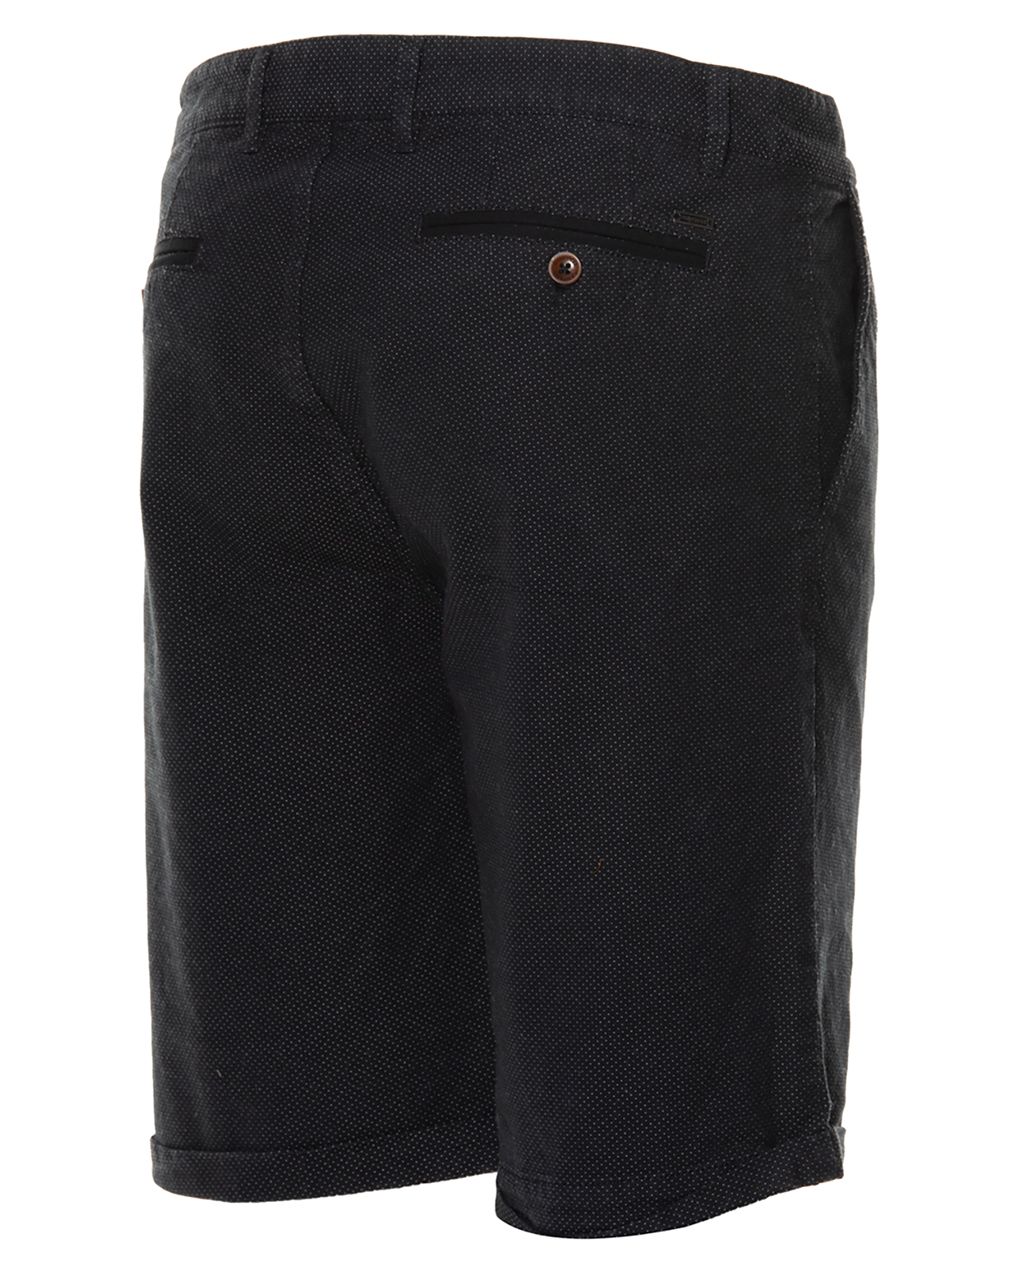 Campbell Classic Short Donkerblauw dessin 053809-002-31